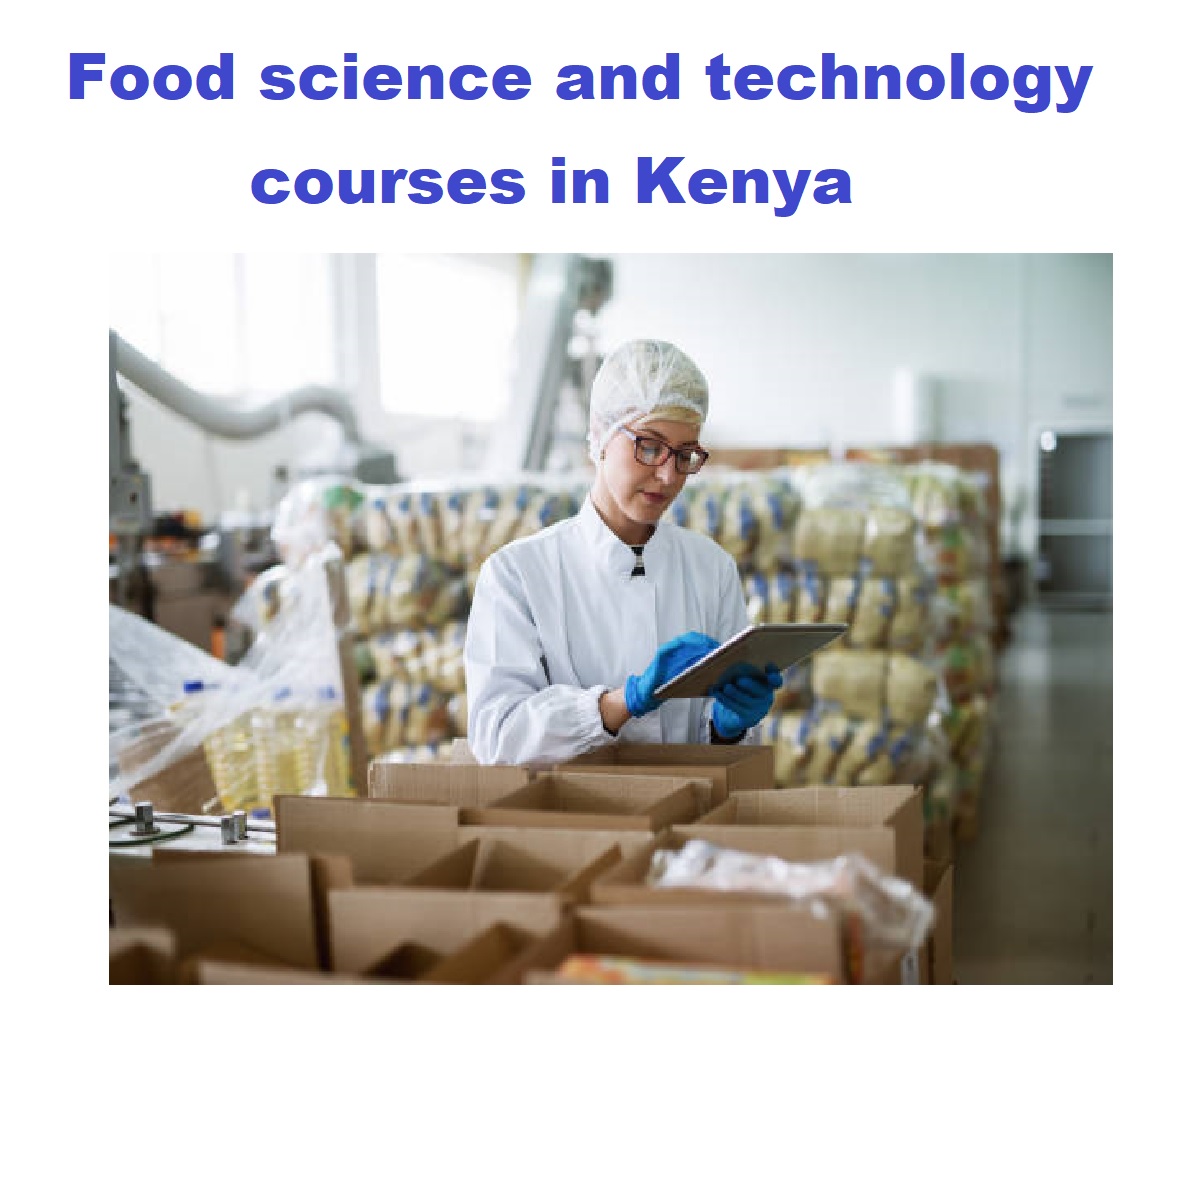 Food science and technology courses in Kenya